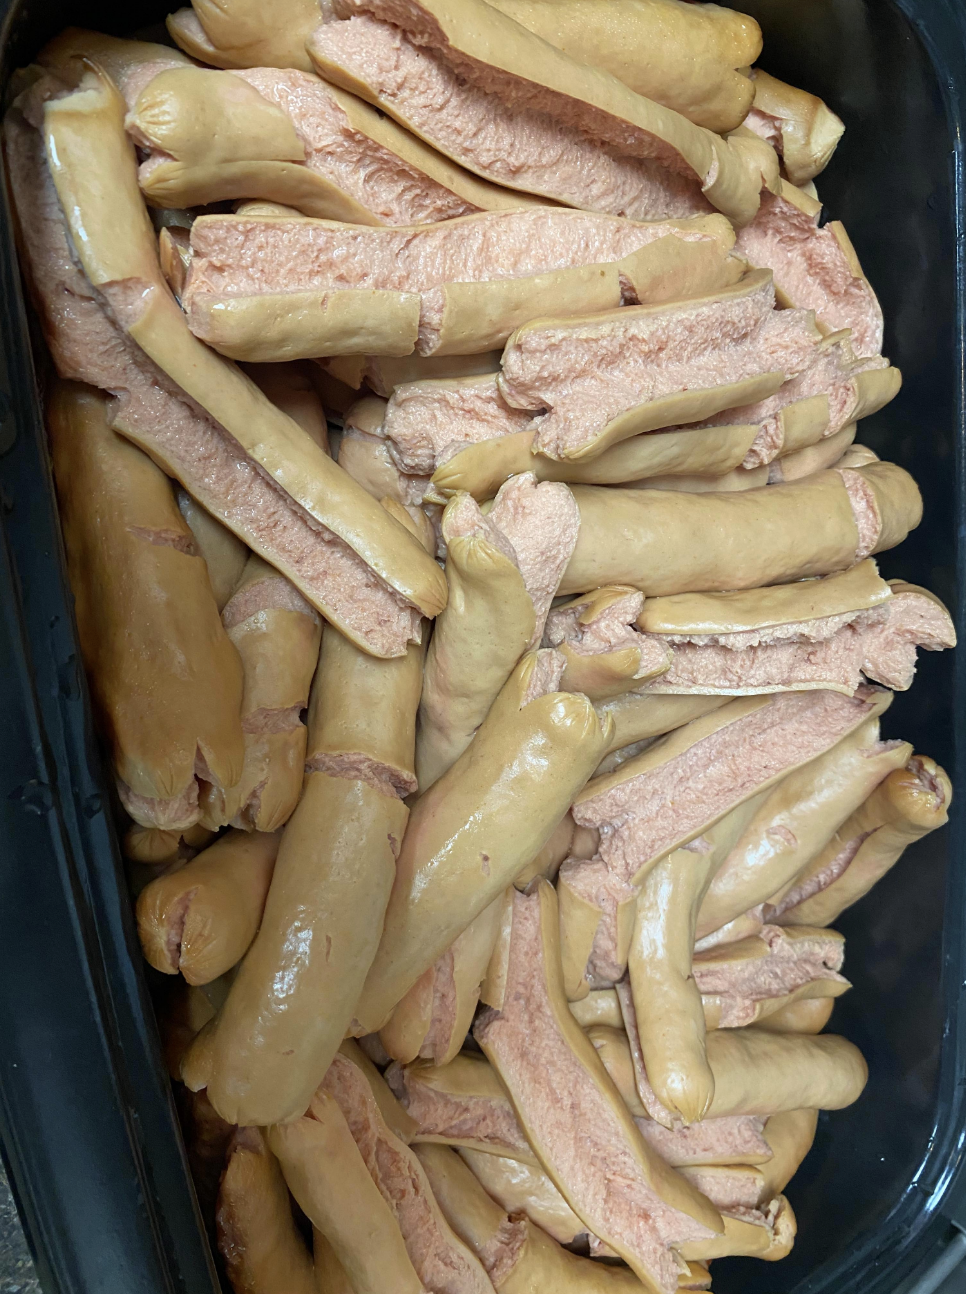 The hot dogs have split open, dried out, and become discolored